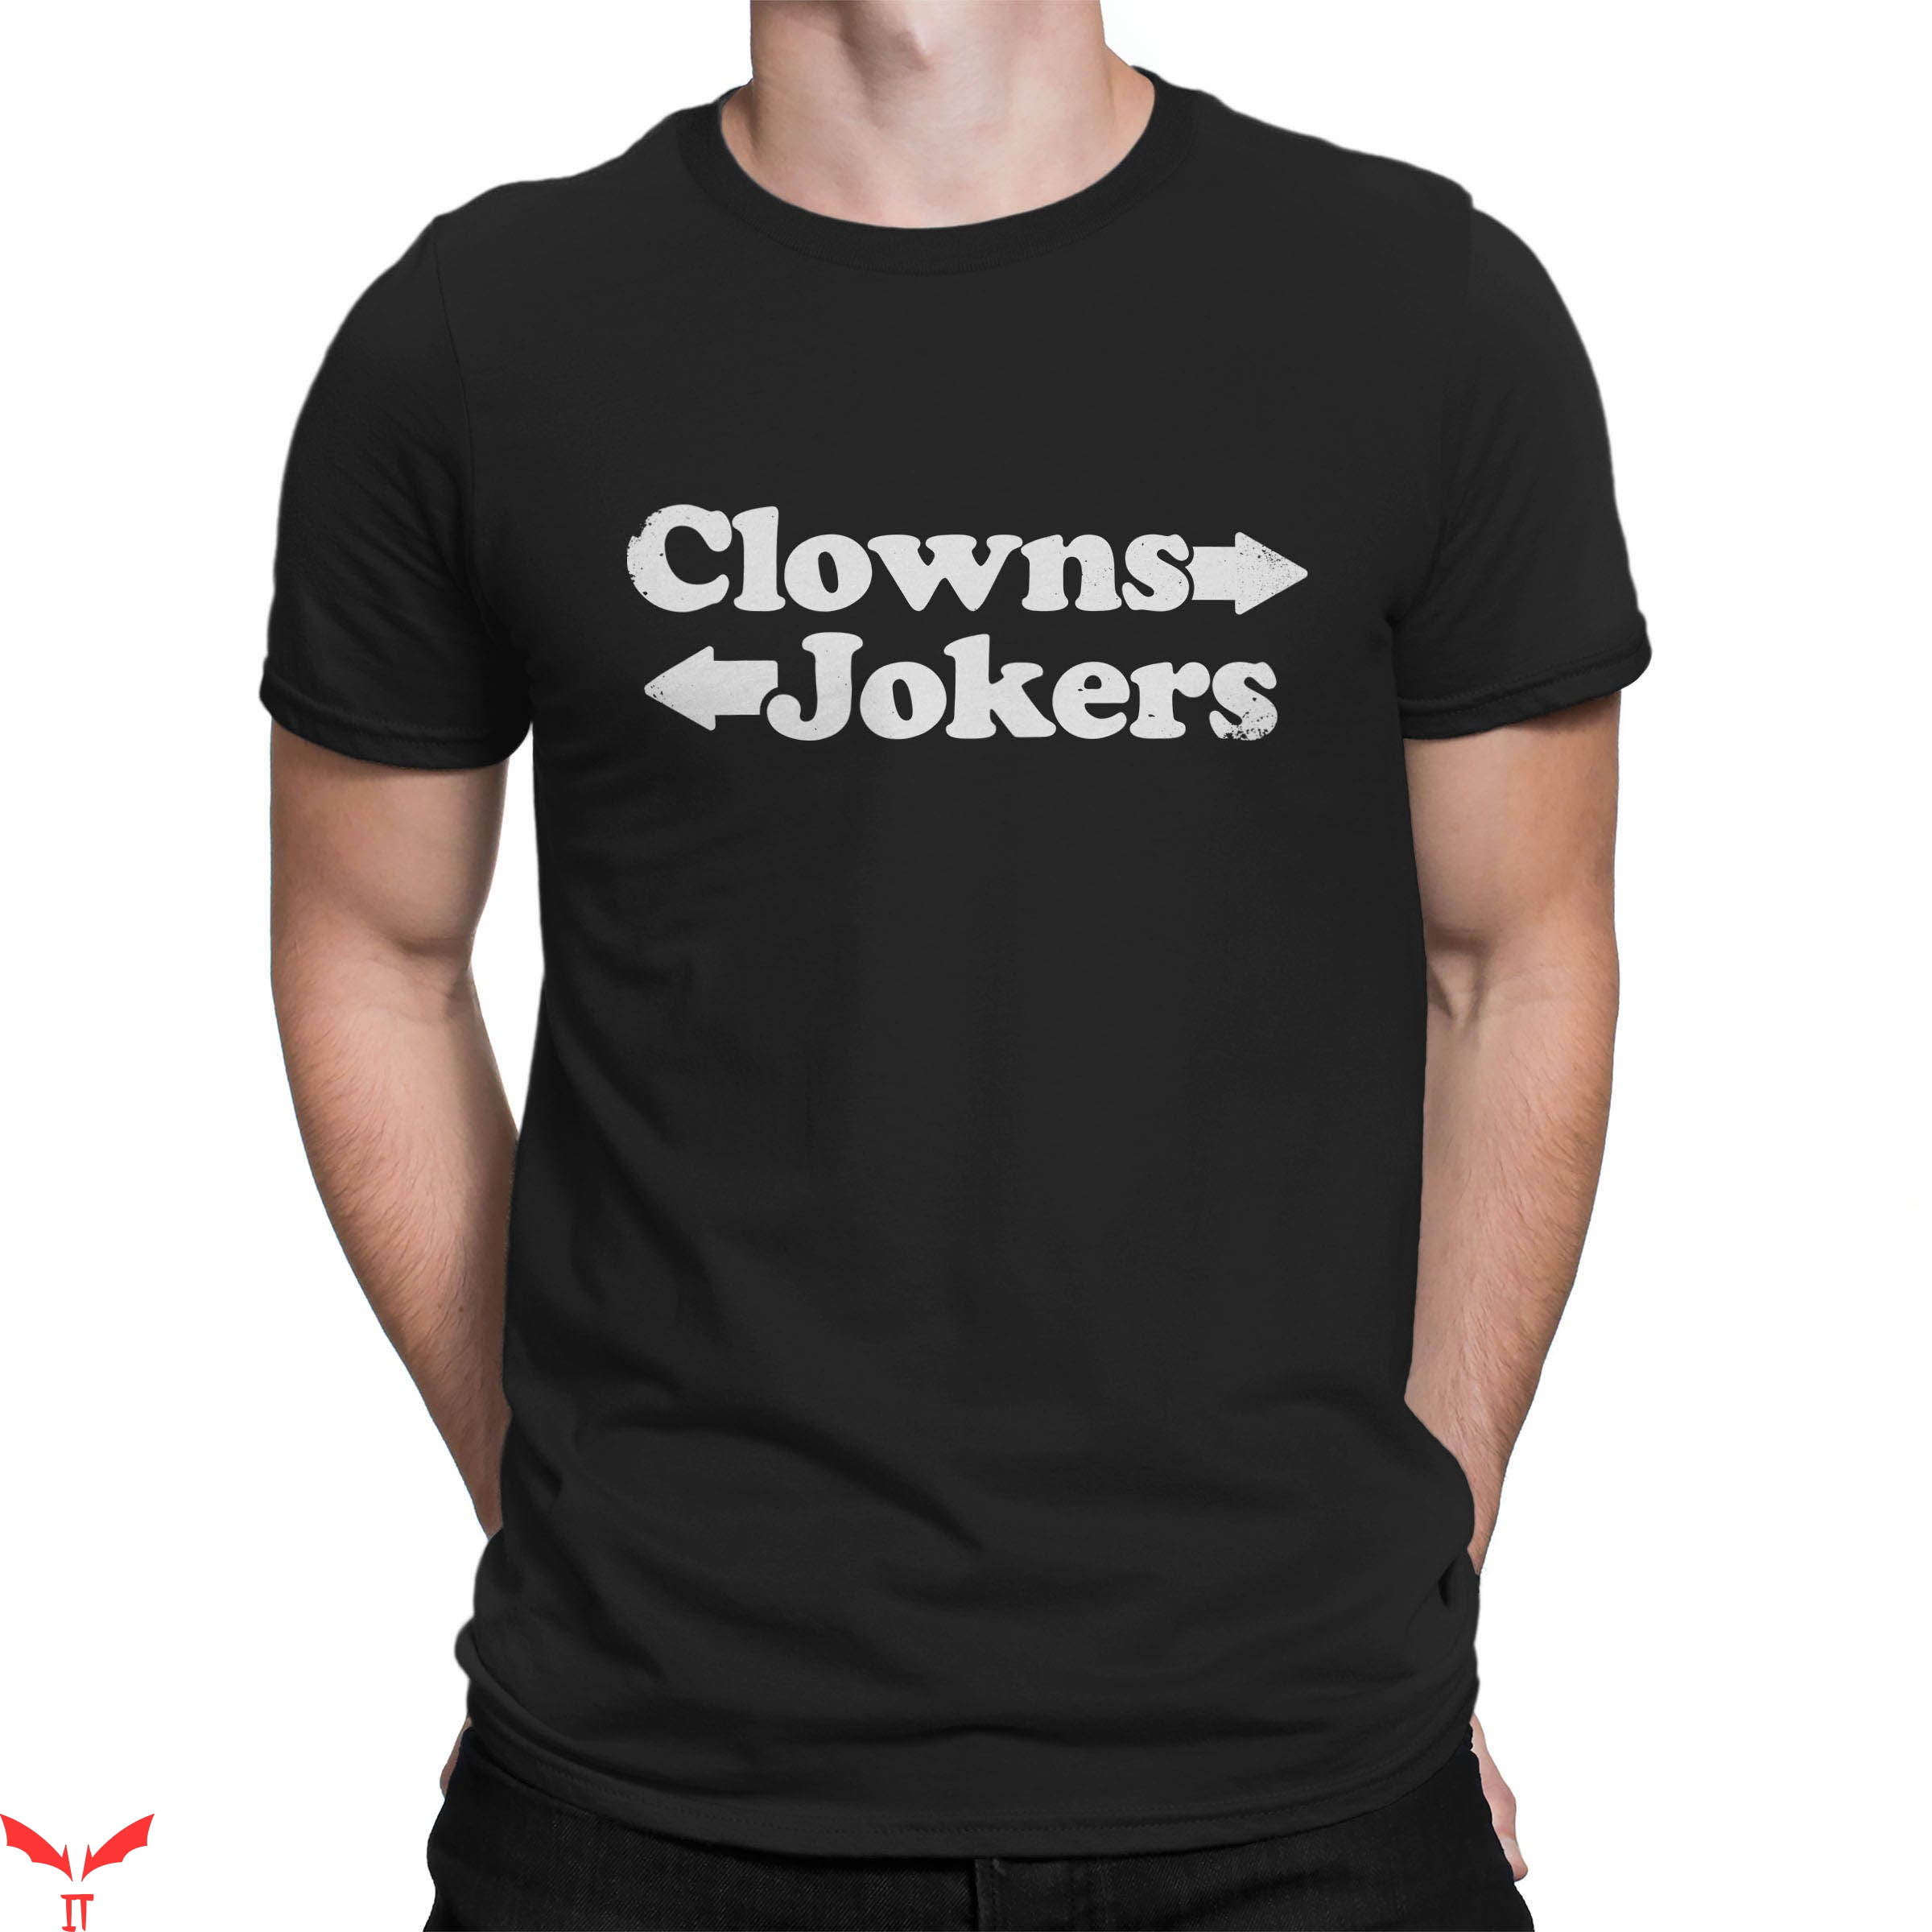 IT The Clown T-Shirt Clowns To The Left Jokers To The Right